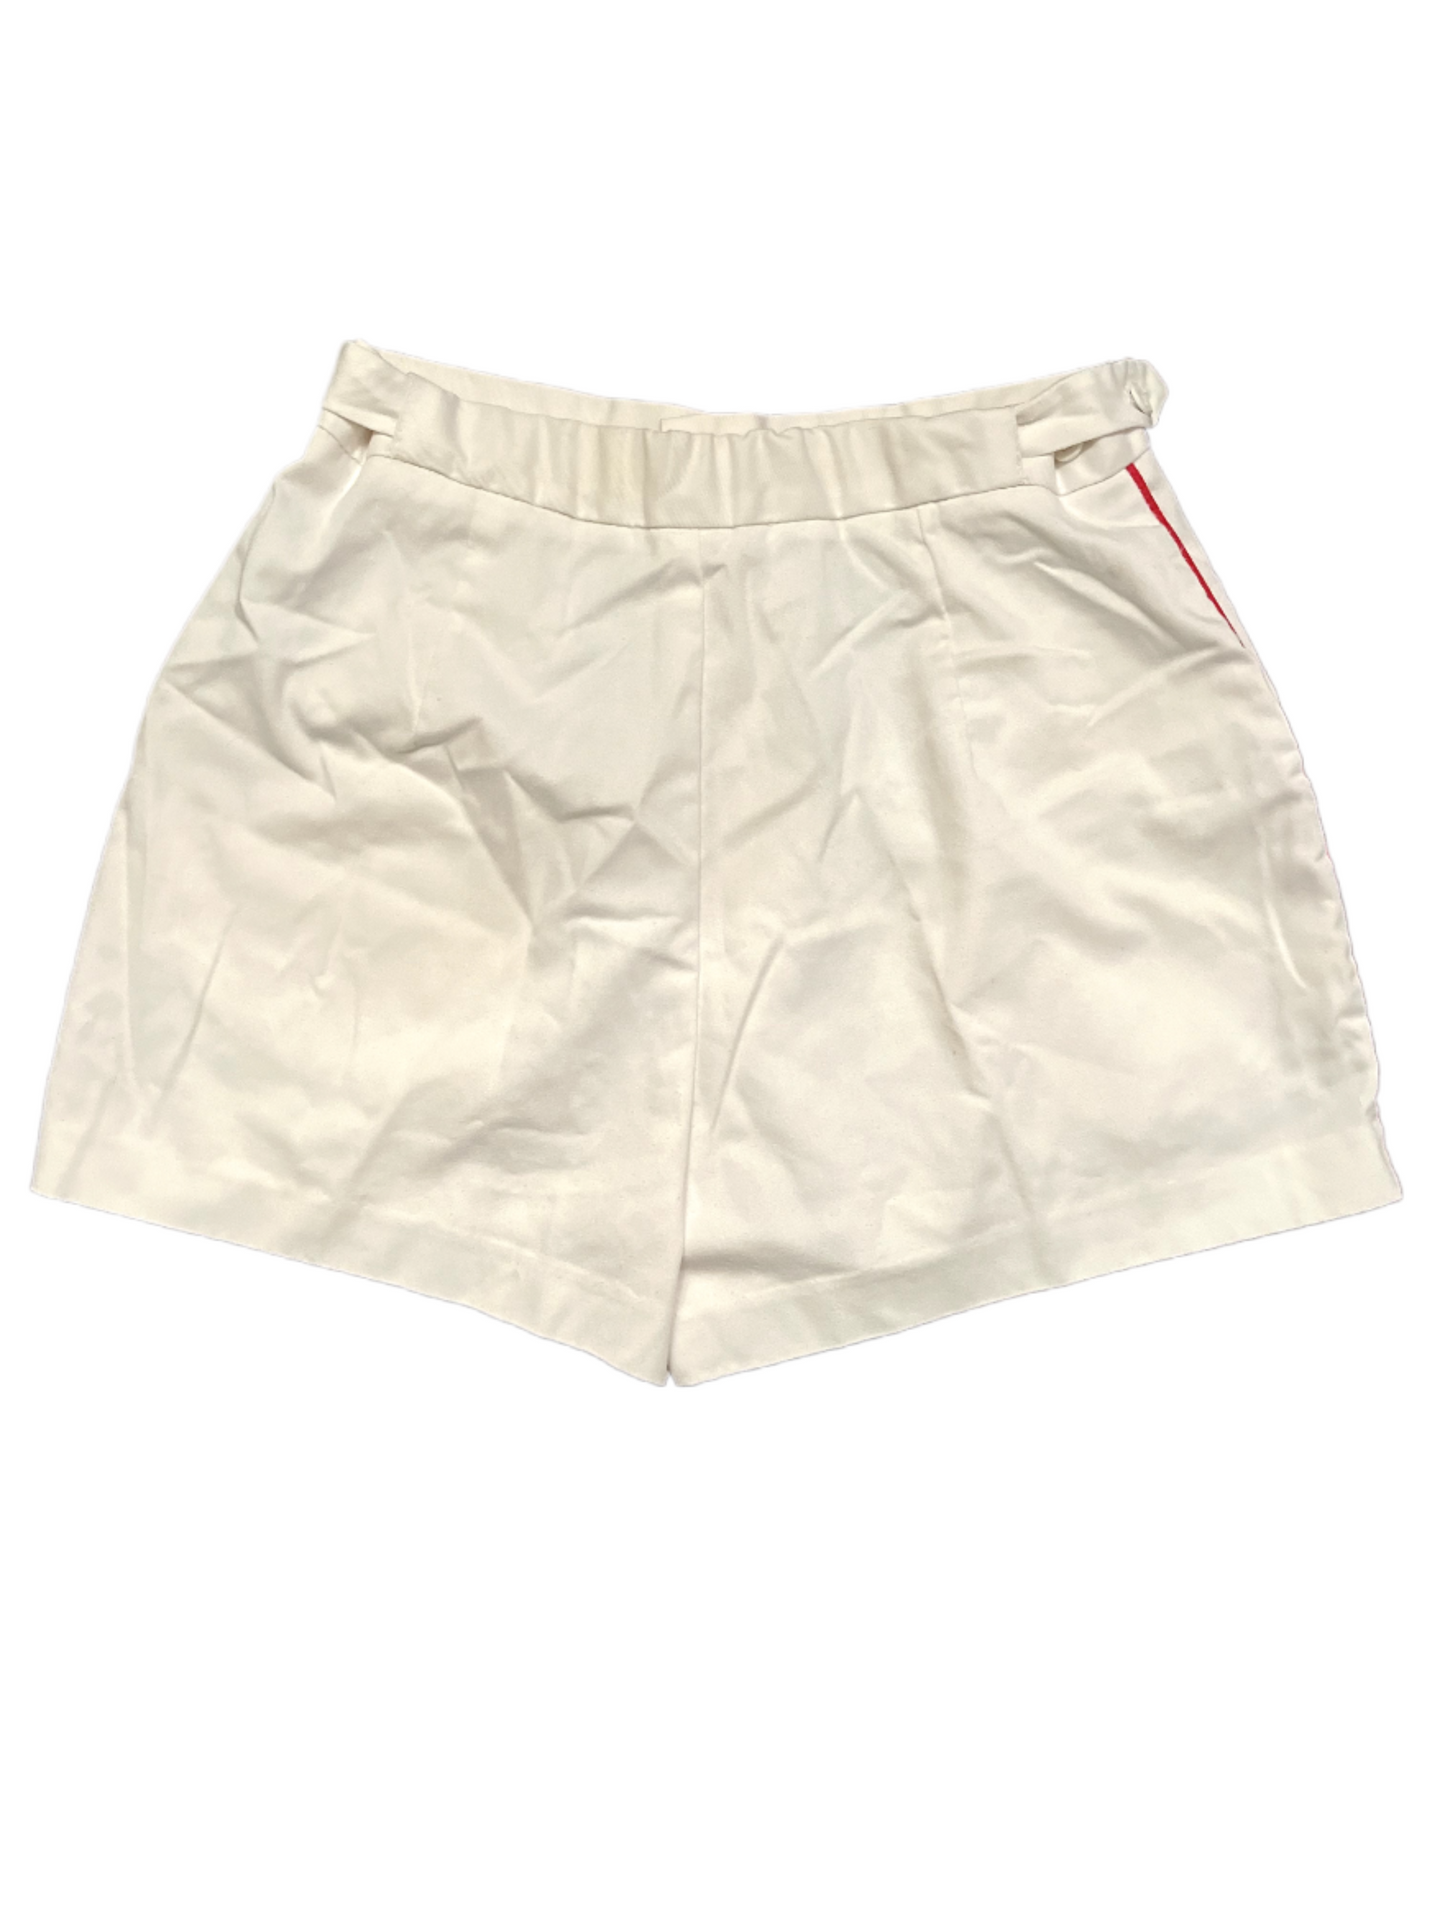 Back of white shorts with red stripe on white background.